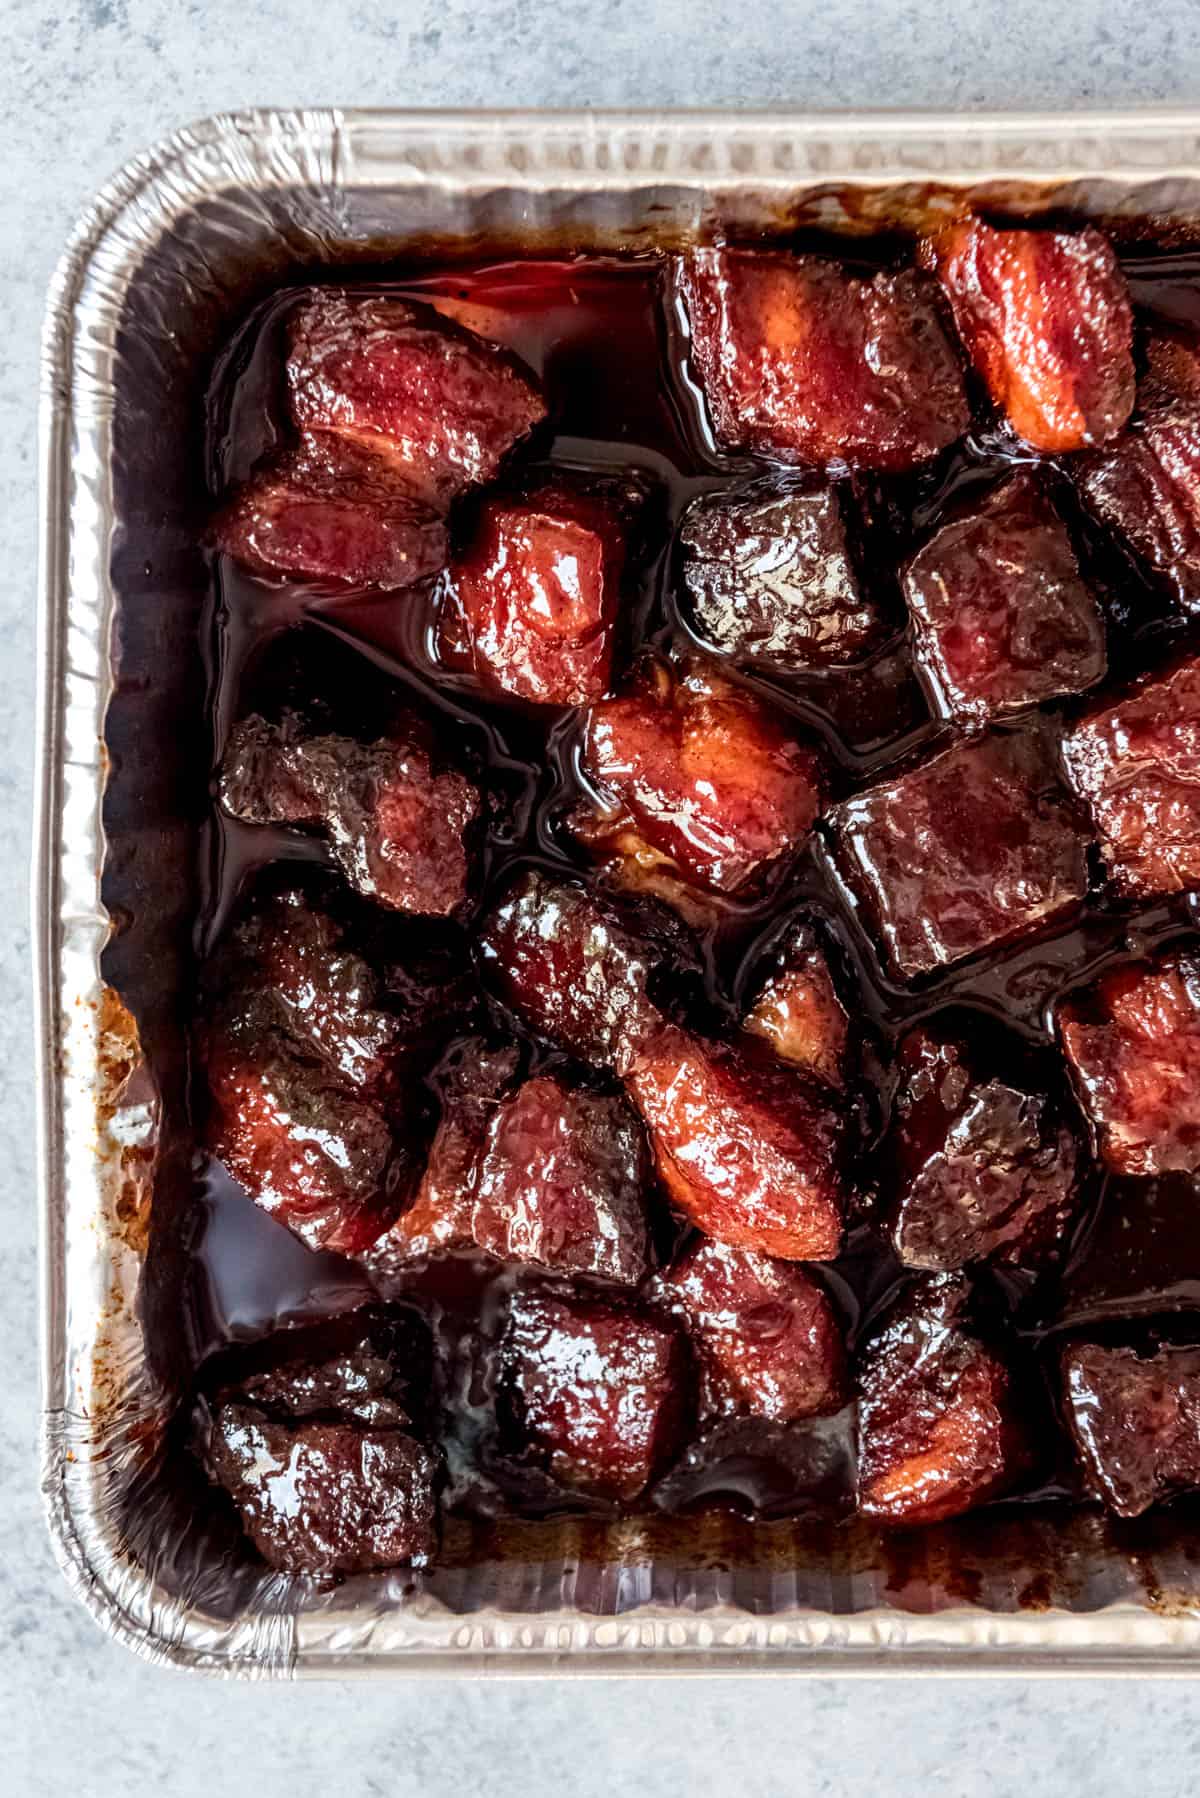 An image of smoked pork belly burnt ends in a sweet honey barbecue sauce.